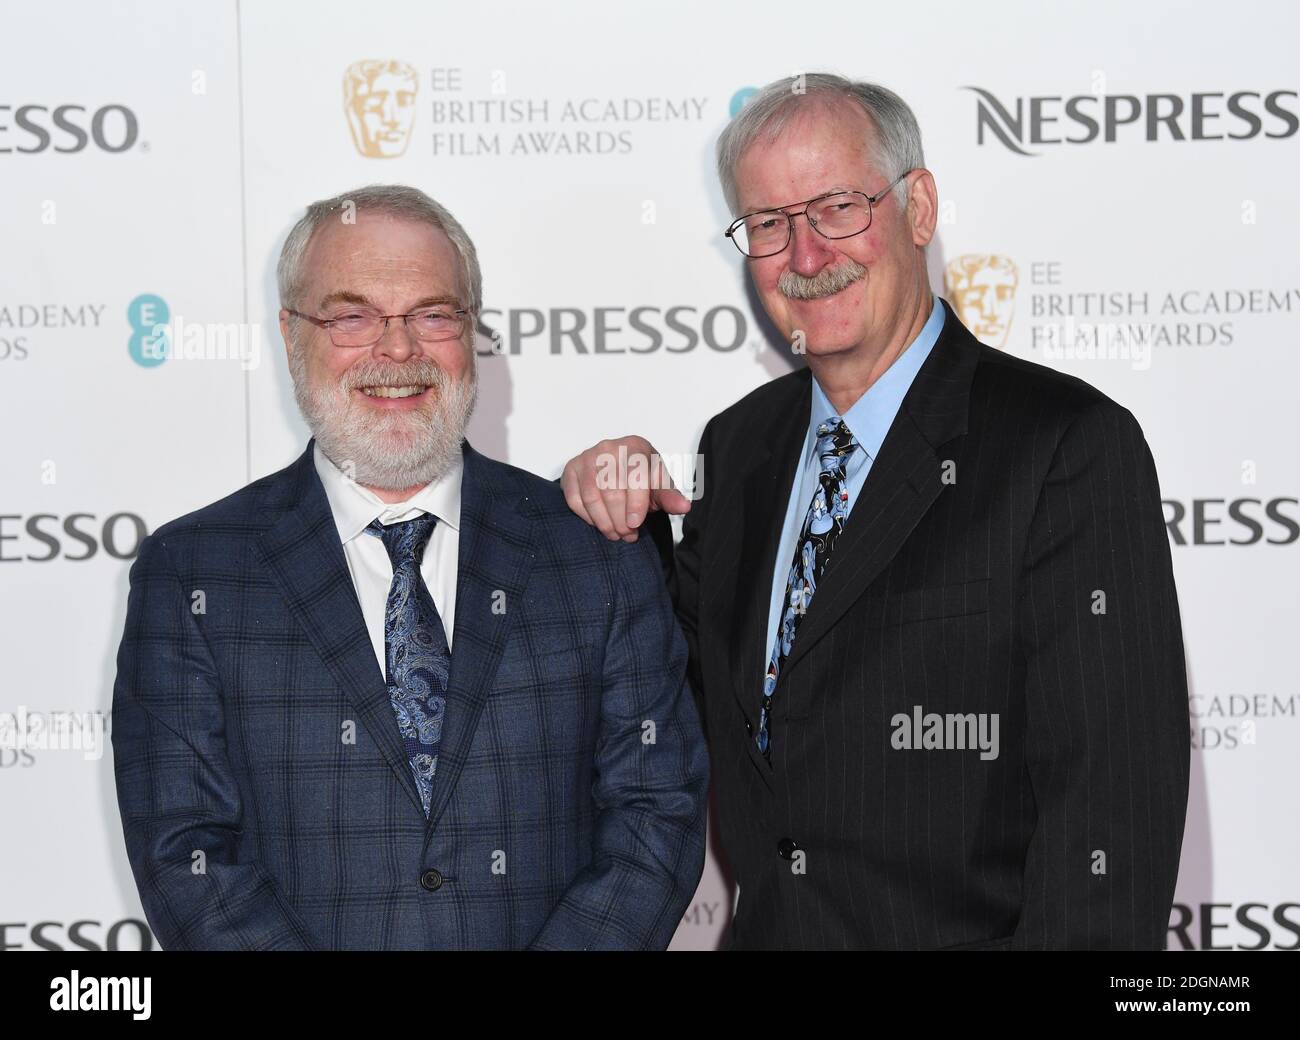 Ron Clements and John Musker attending the EE British Academy Film Awards Nespresso Nominees' Party at Kensington Palace, London Stock Photo